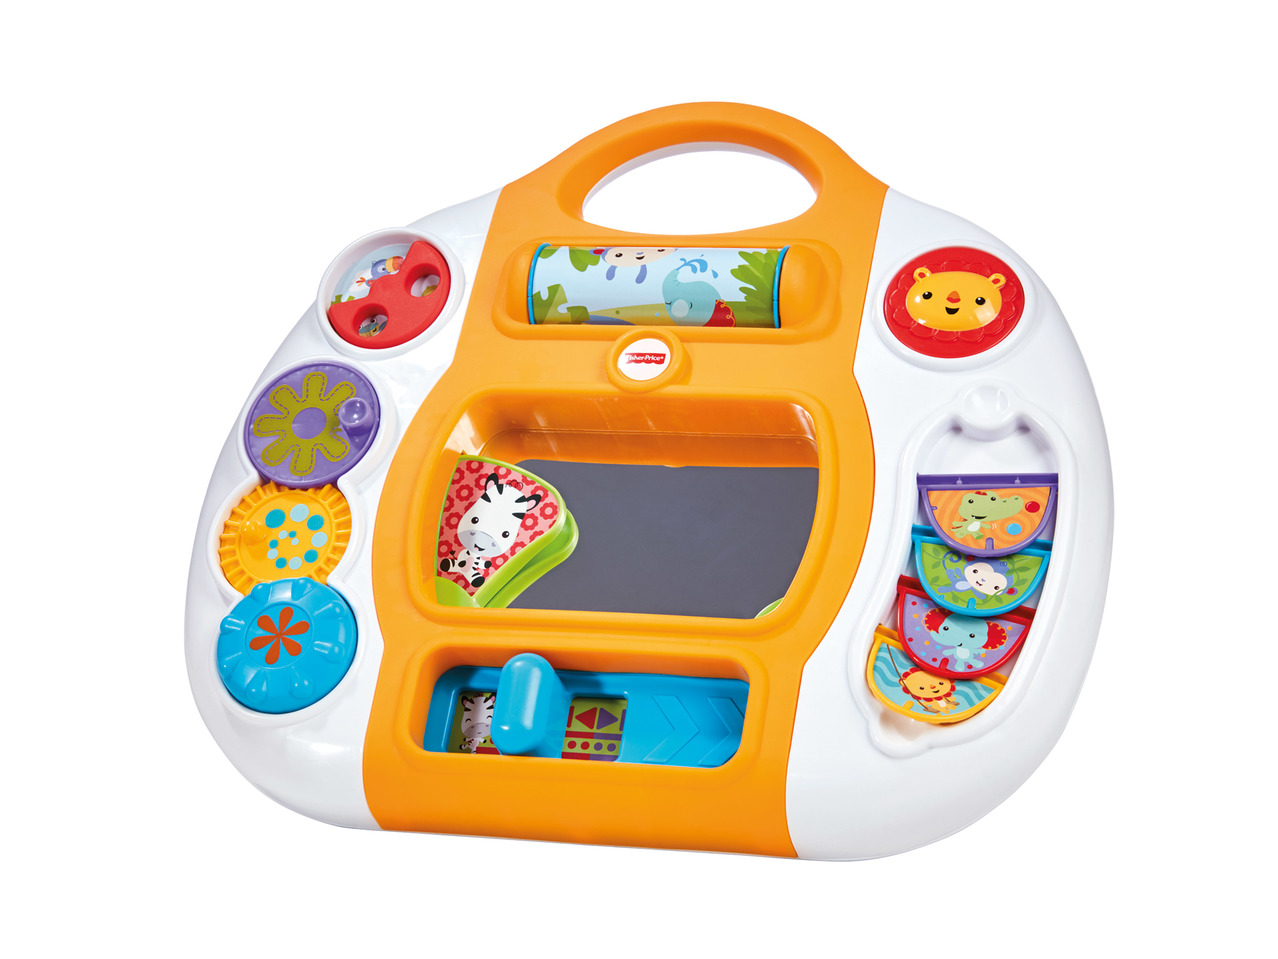 Fisher Price Toys1